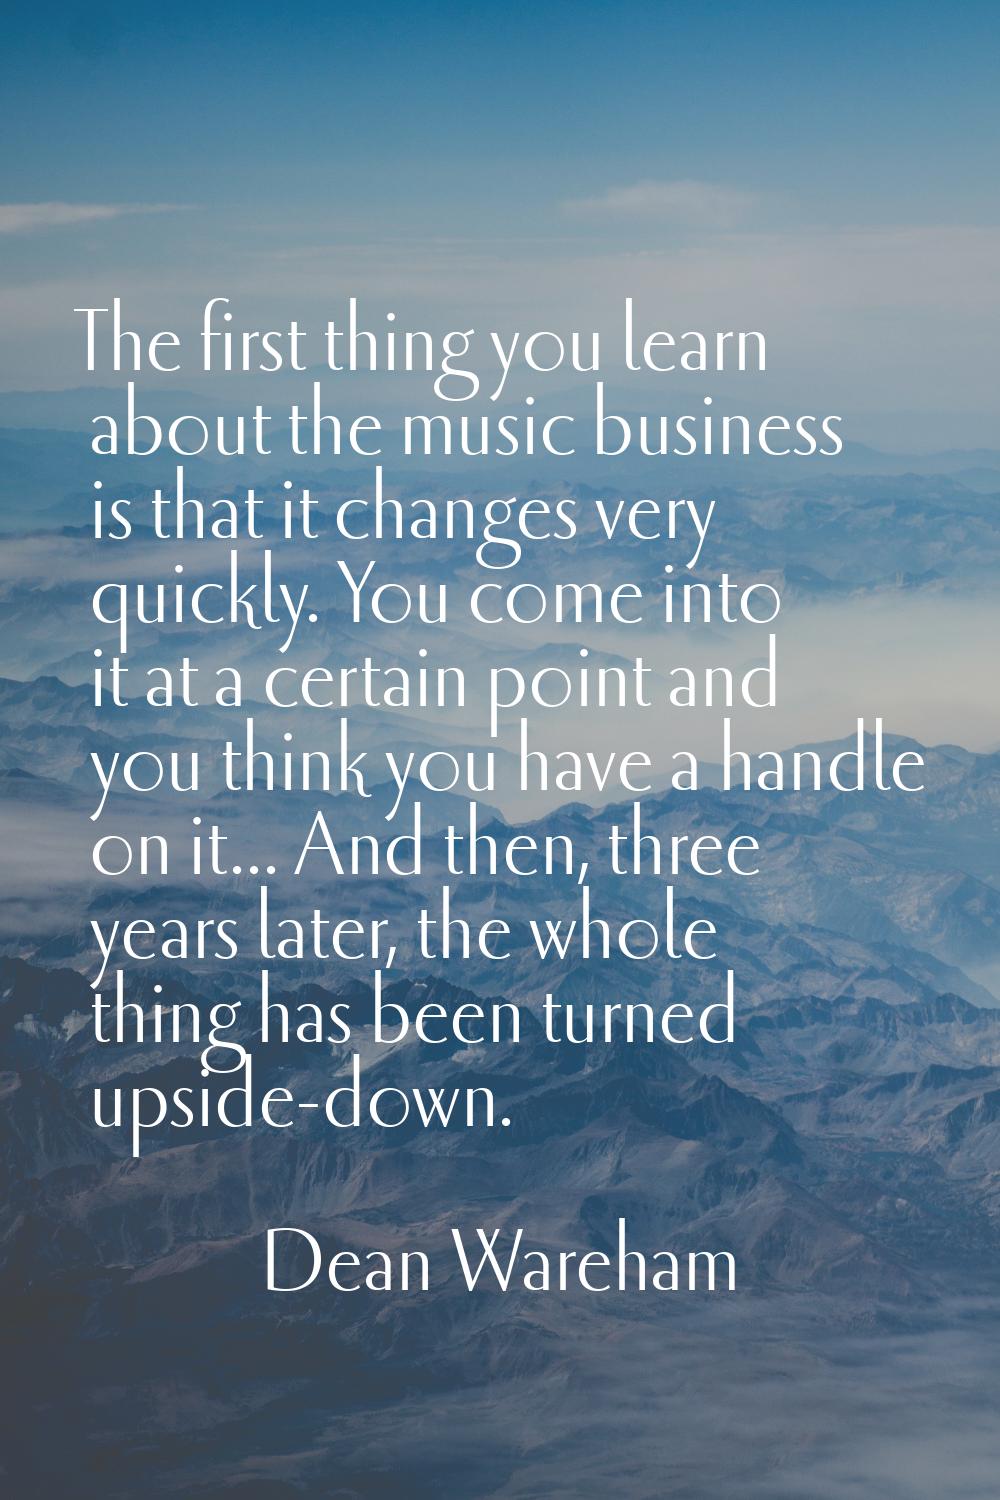 The first thing you learn about the music business is that it changes very quickly. You come into i